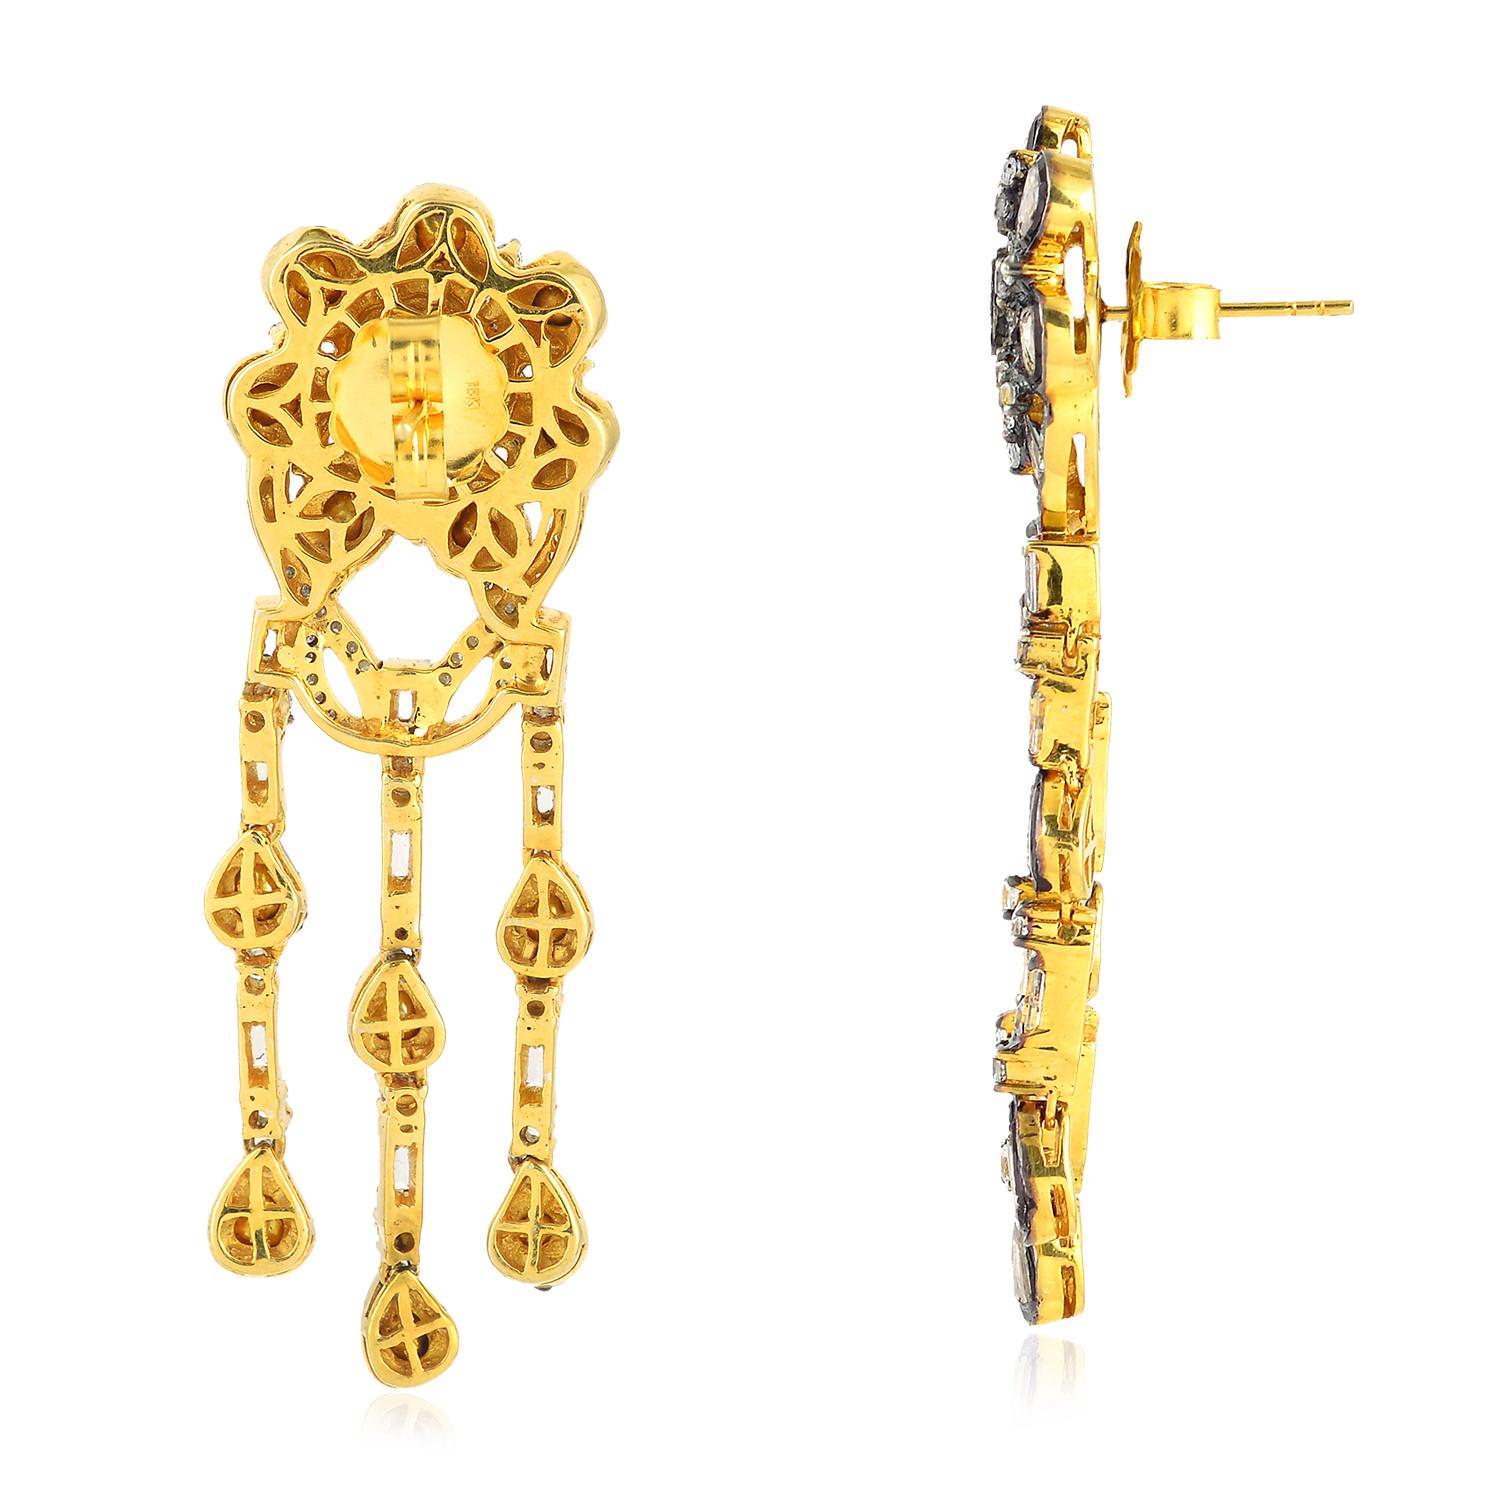 Inspired by the Mughal Era & Royal heritage these stunning earrings are handcrafted with 18-karat gold & sterling silver.  They have a chandelier-style silhouette that's encrusted with 3.41 carats topaz and 4.5 carats rose cut diamonds with